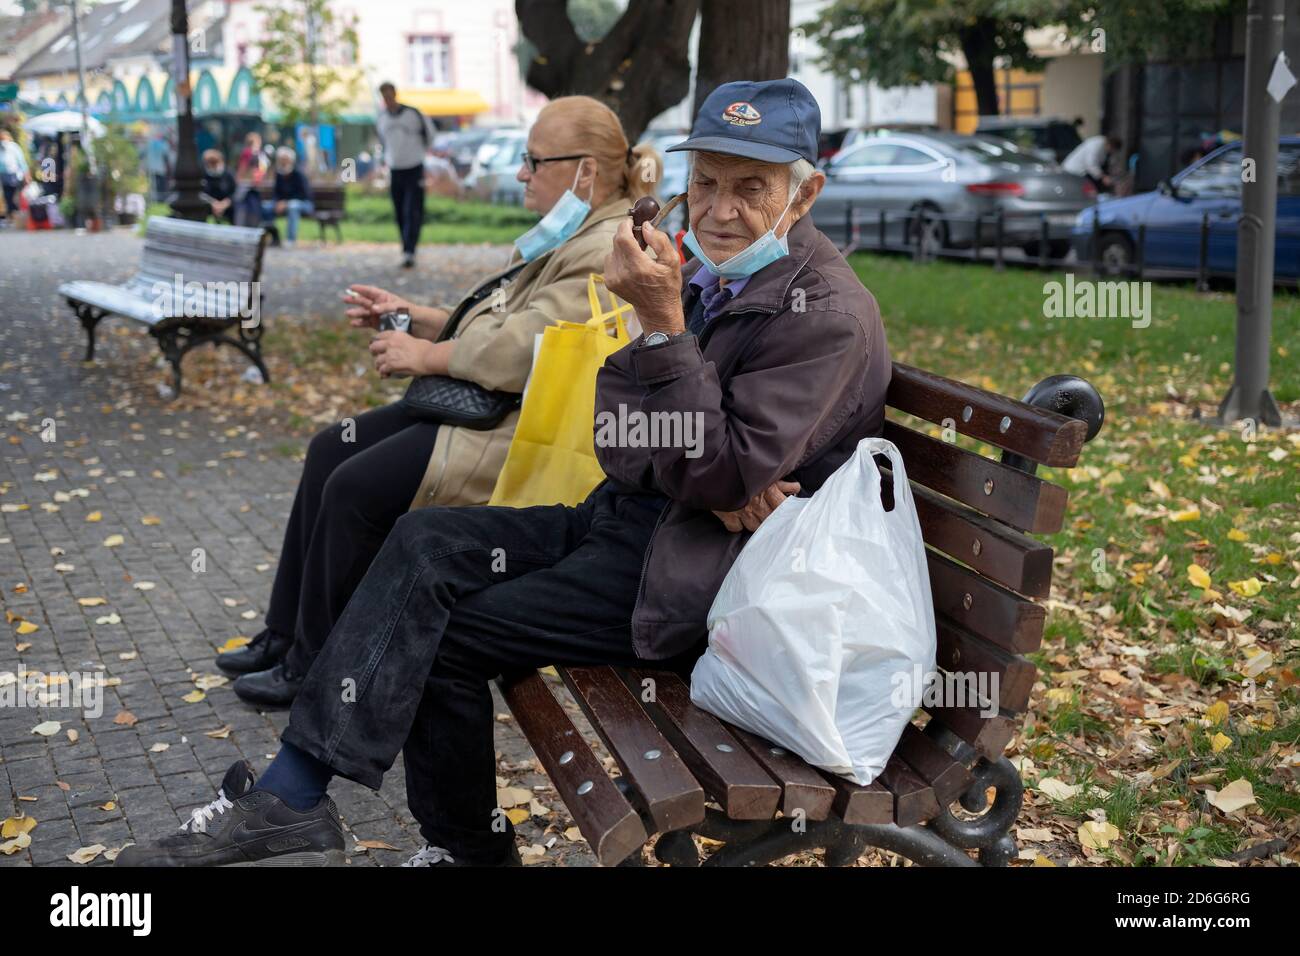 Belgrade, Serbia, Oct 11, 2020: Woman seated on a bench smoking cigarette next to a man smoking pipe Stock Photo